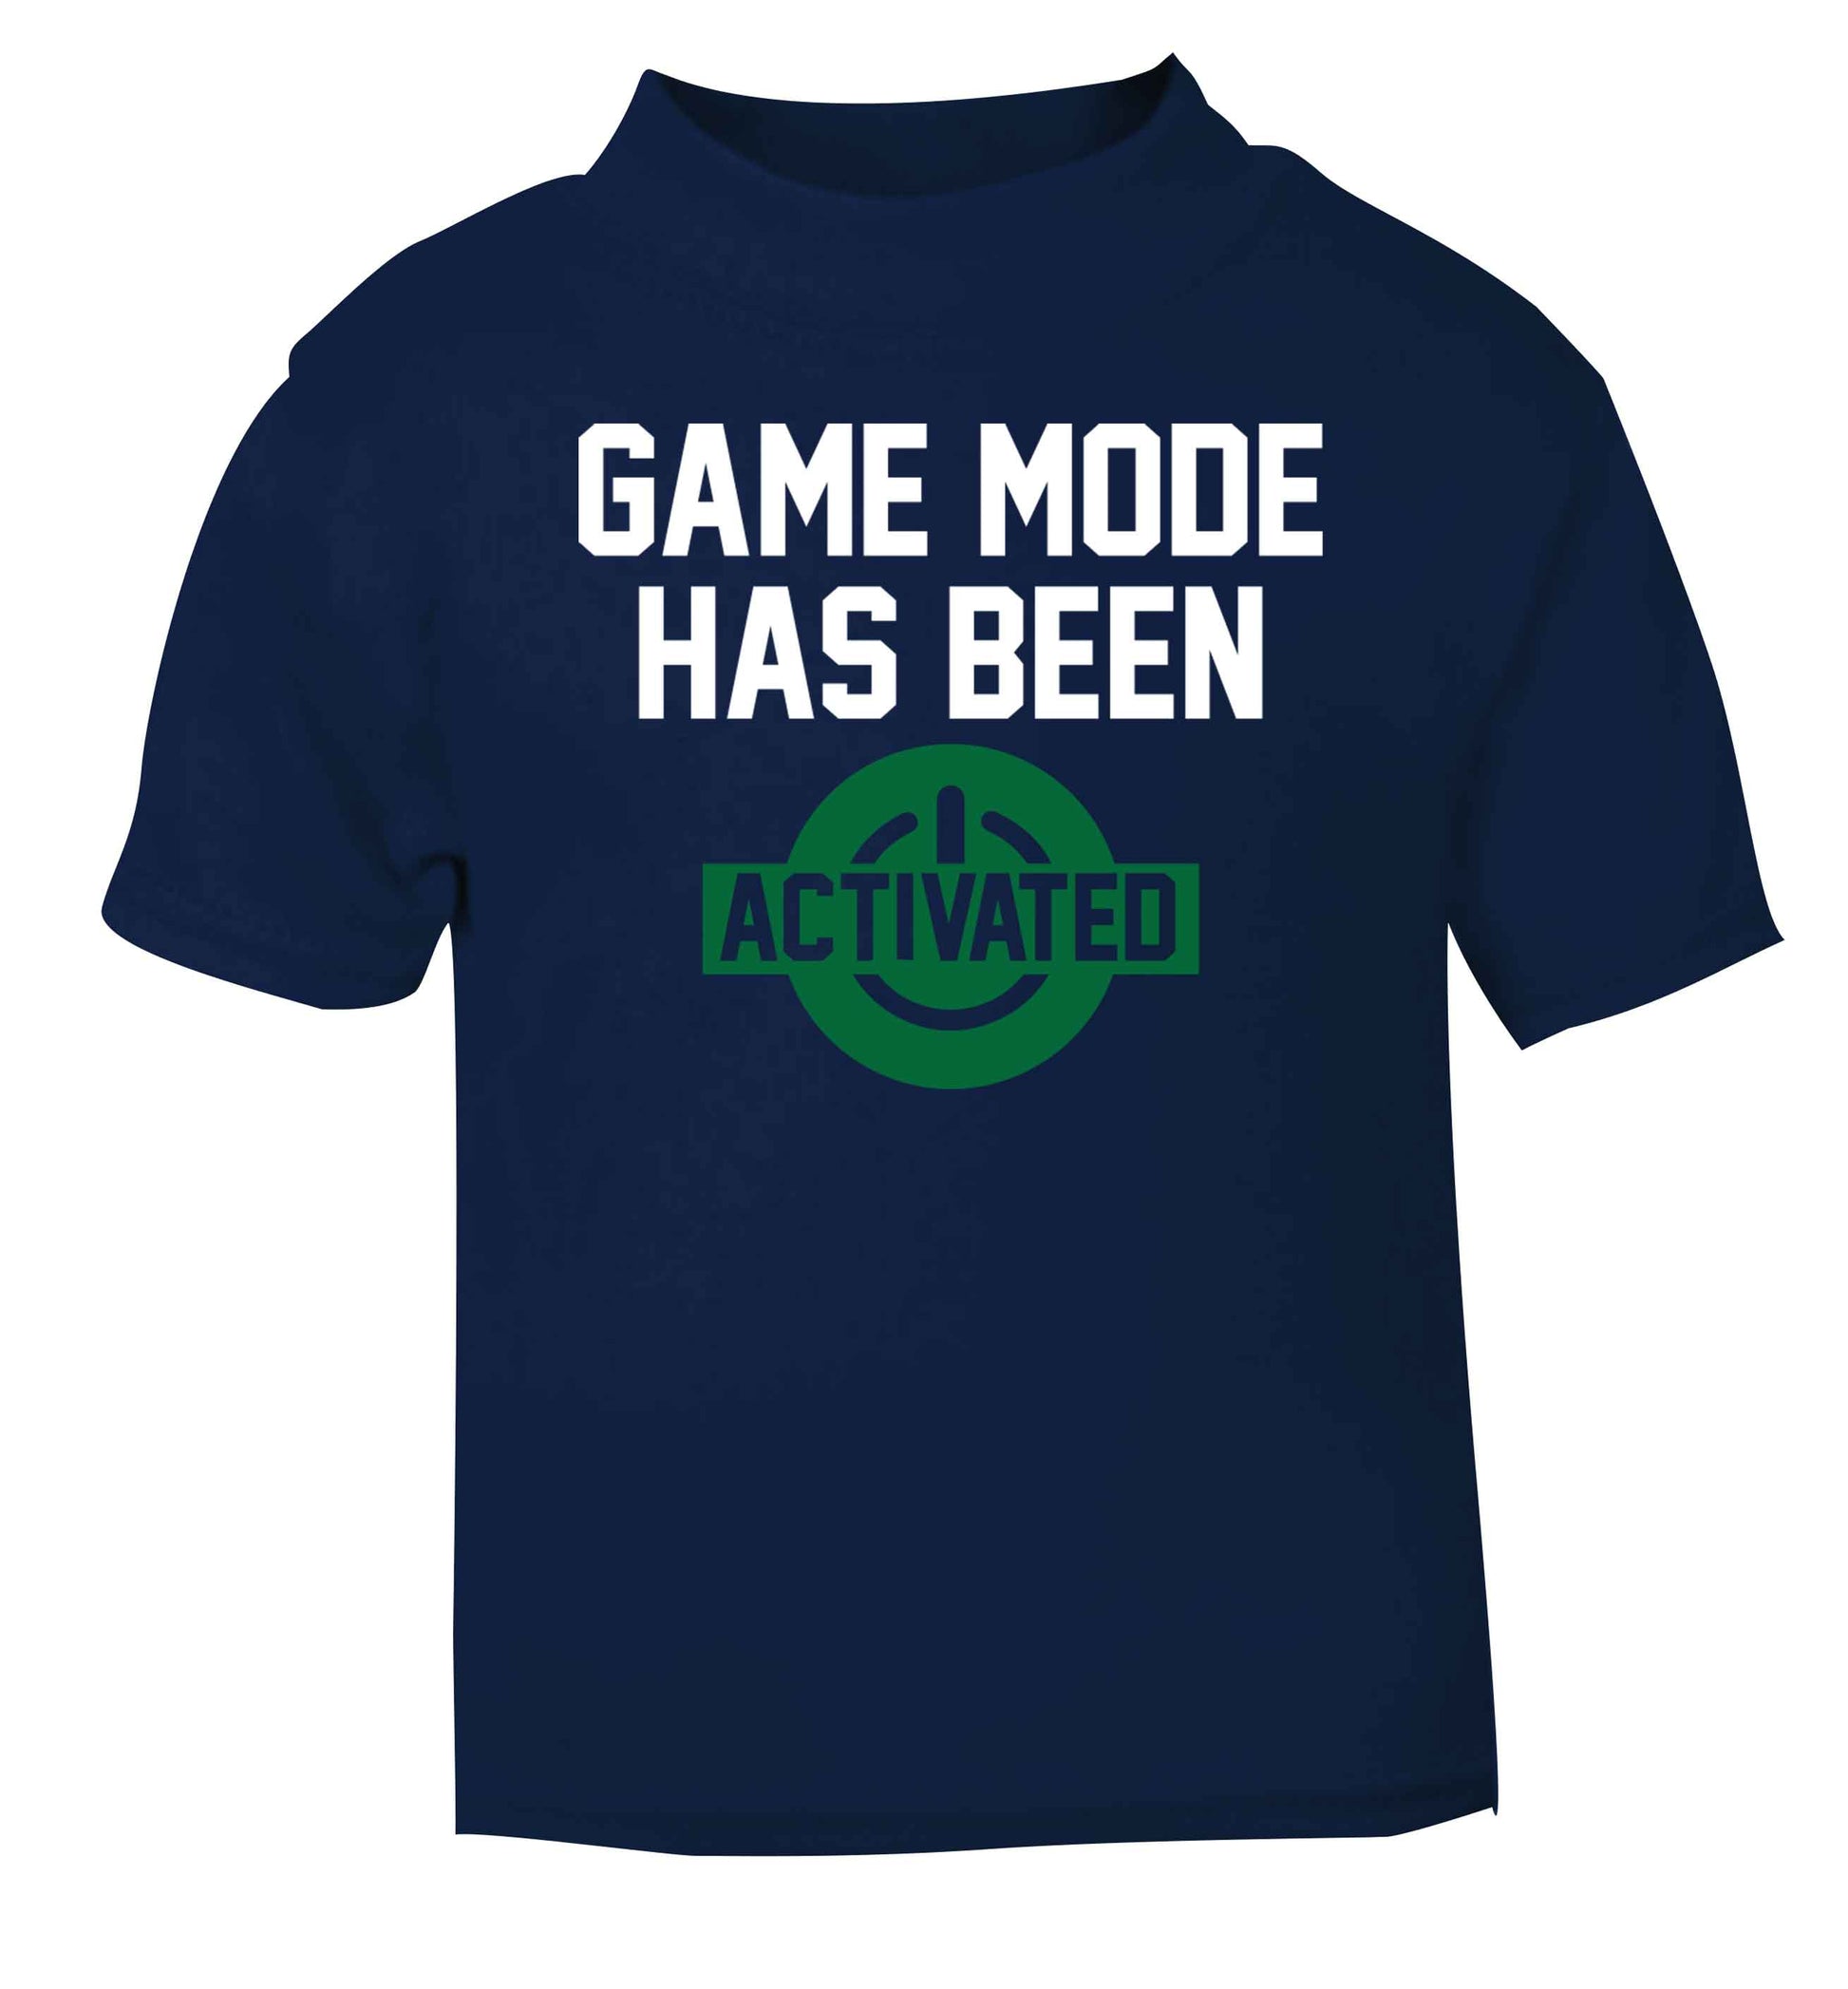 Game mode has been activated navy baby toddler Tshirt 2 Years